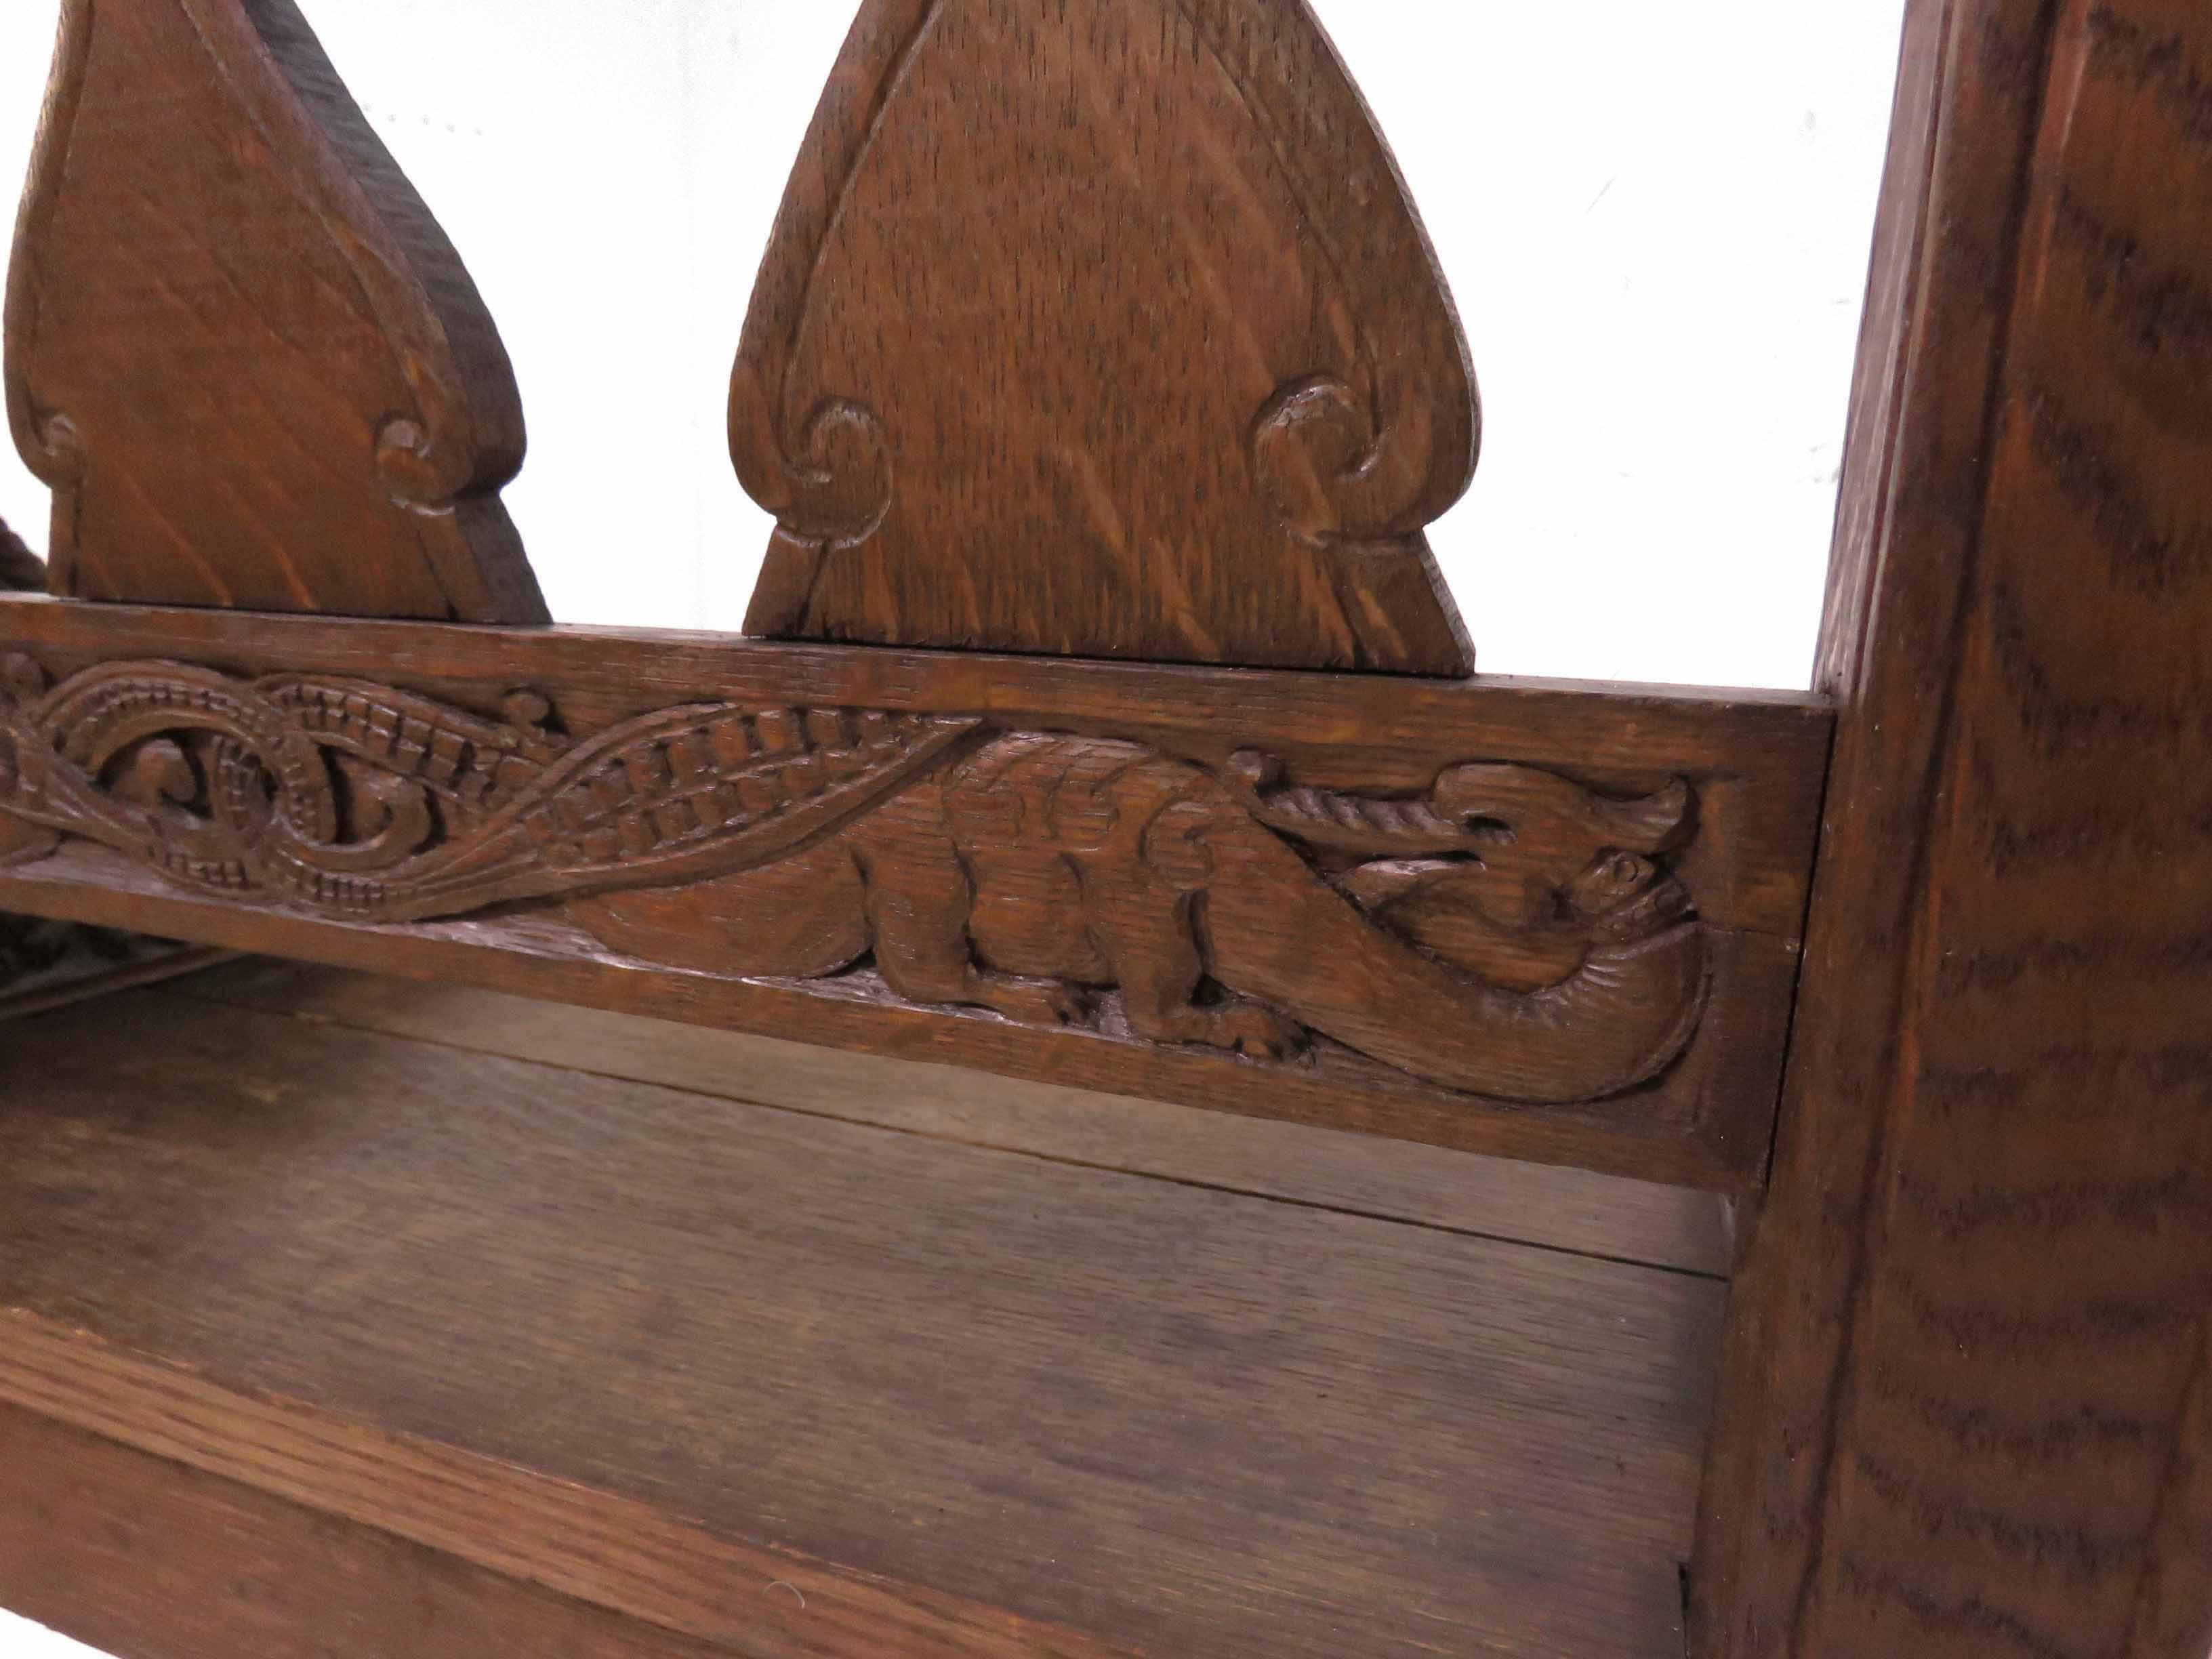 Hand-Carved Hand Carved Arts & Crafts Gothic Revival Chair Signed and Dated 1903